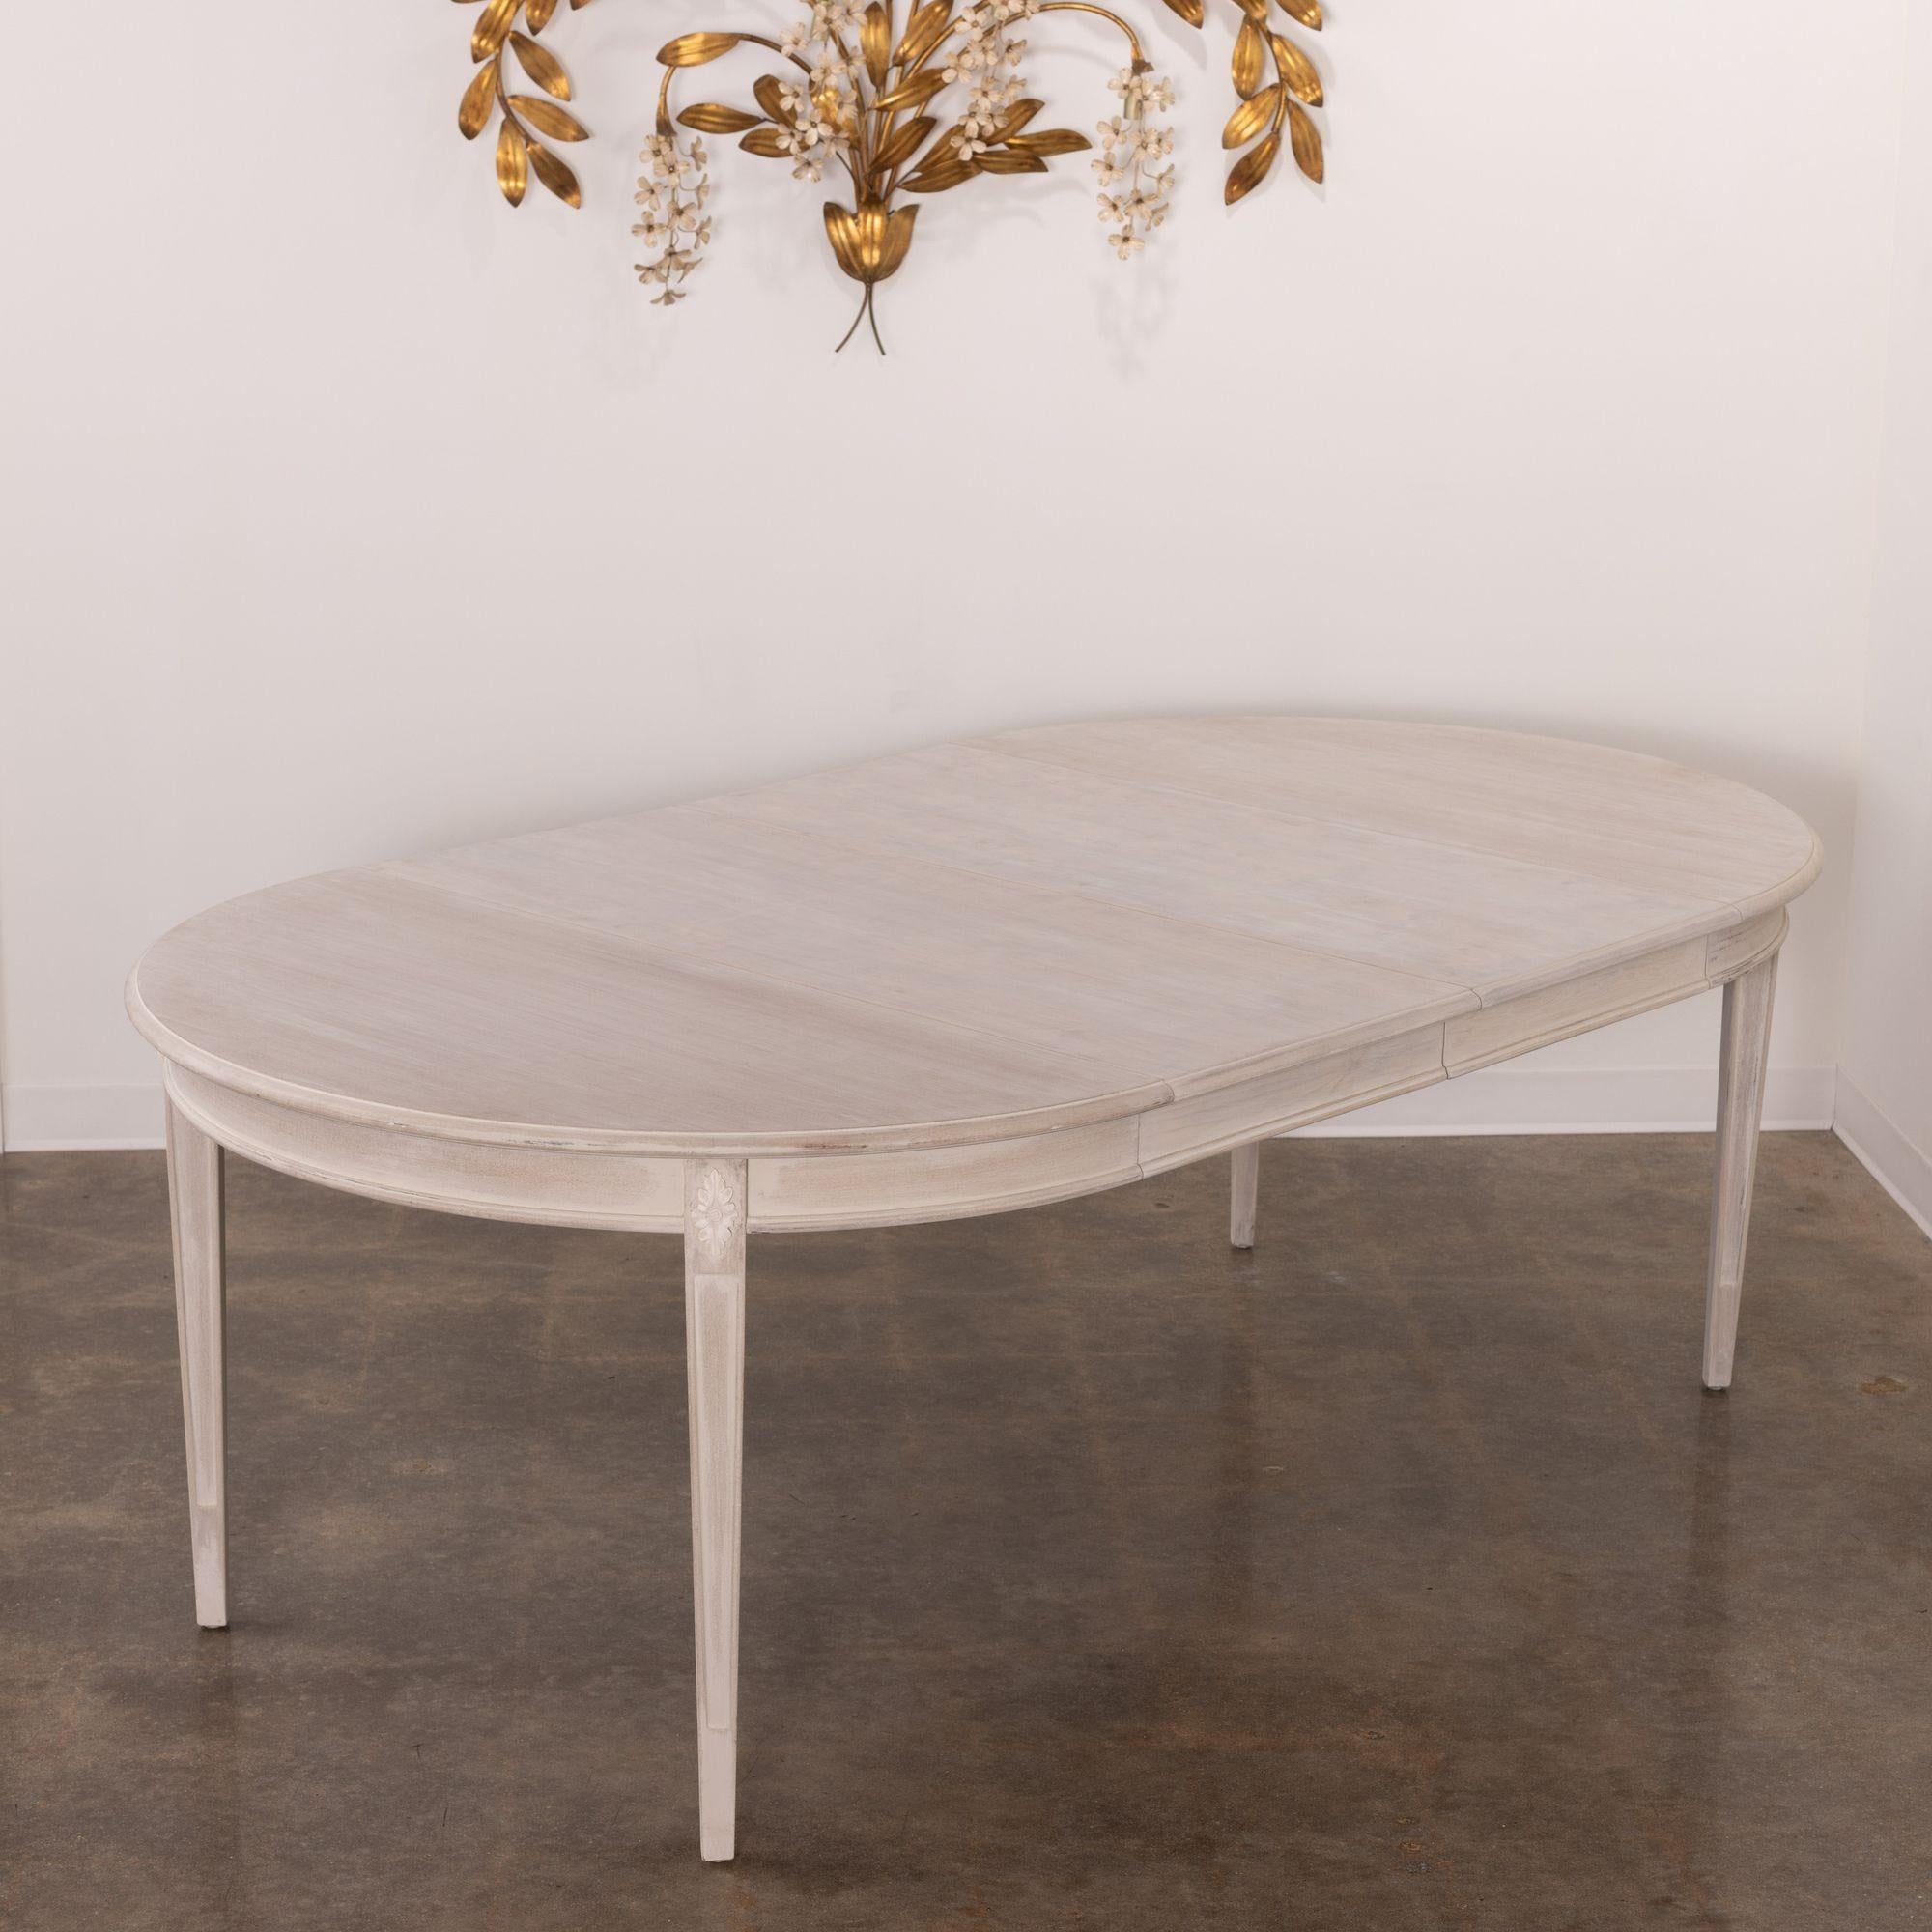 Hand-Carved 19th c. Swedish Gustavian Bleached and Glazed Extension Table with Three Leaves